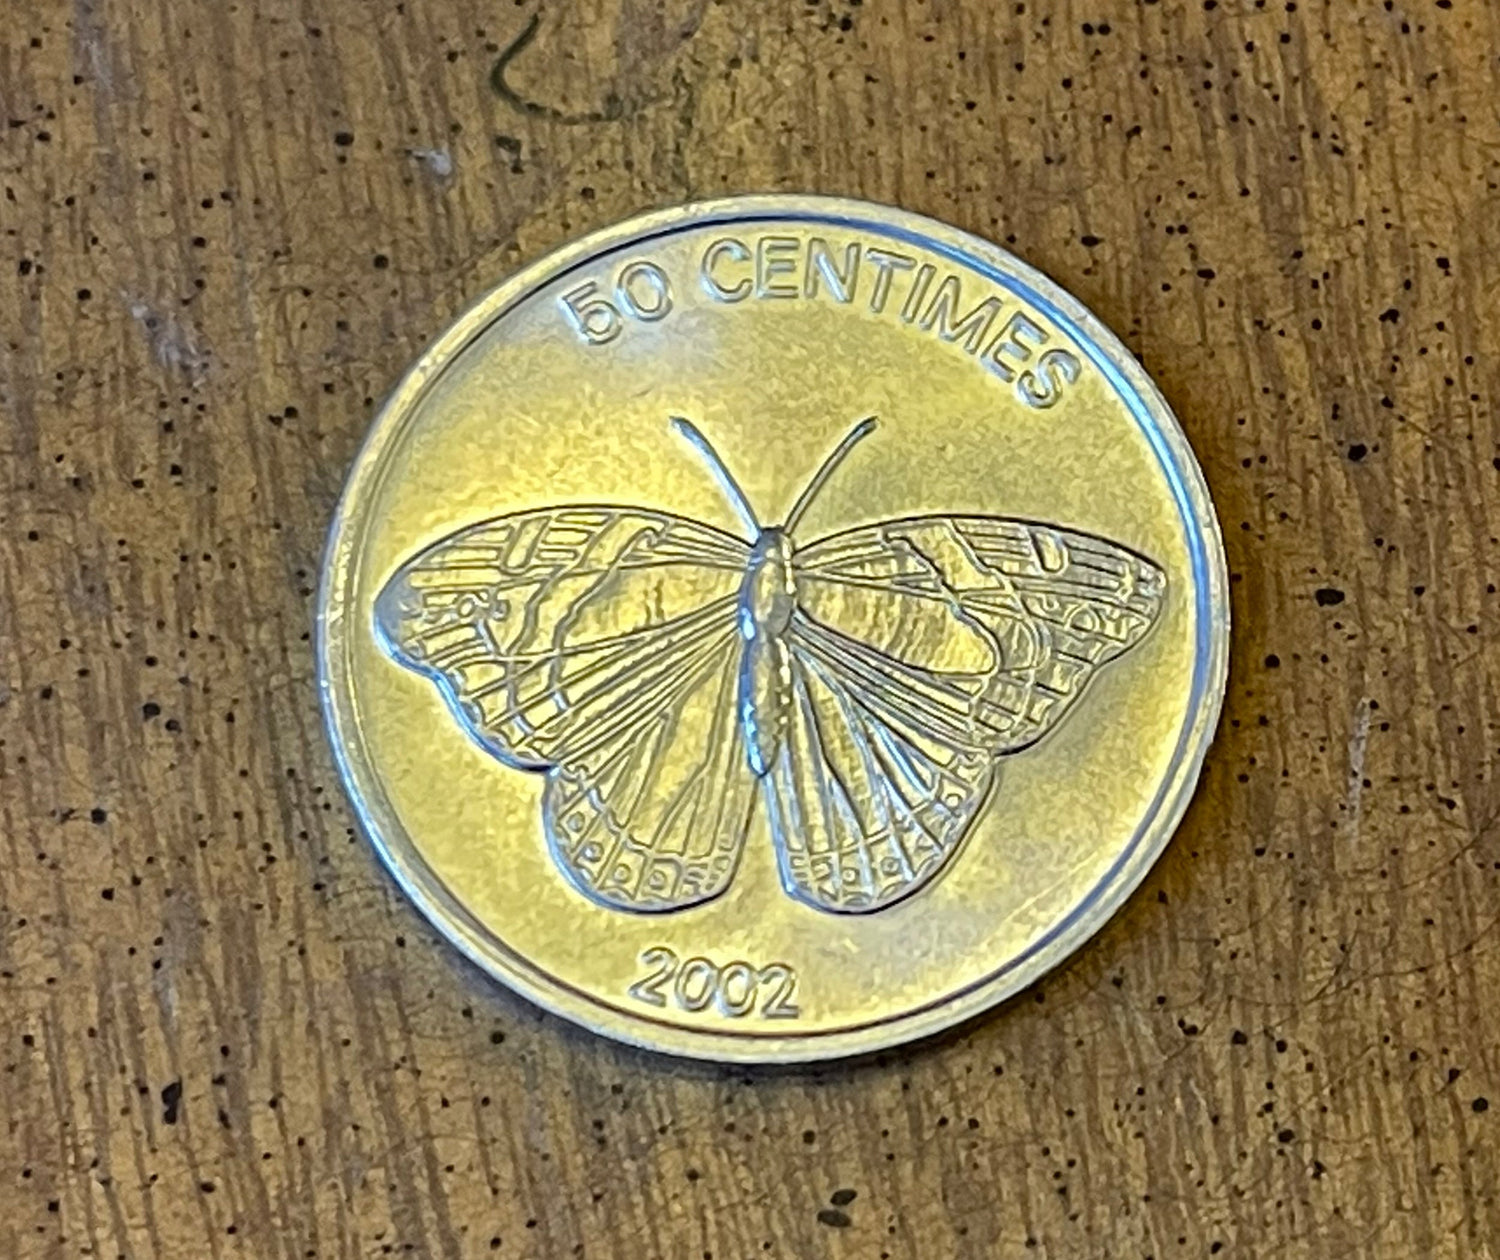 Butterfly & Lion 50 Centimes Democratic Republic of Congo Authentic Coin Money for Jewelry and Craft Making